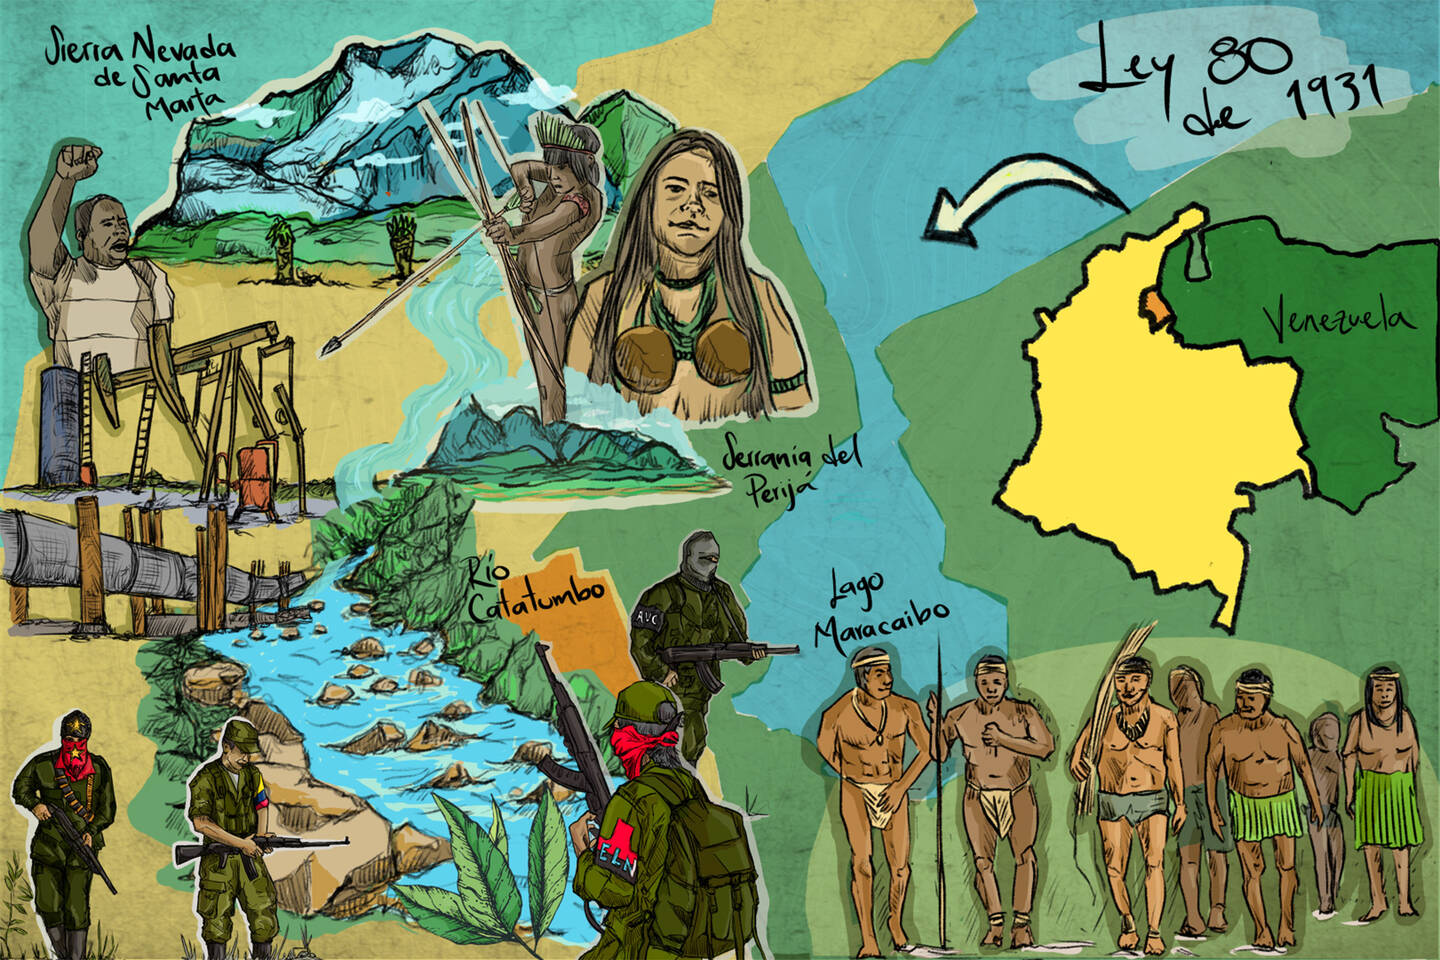 An illustrated map on which political struggles in Colombia are symbolically represented.